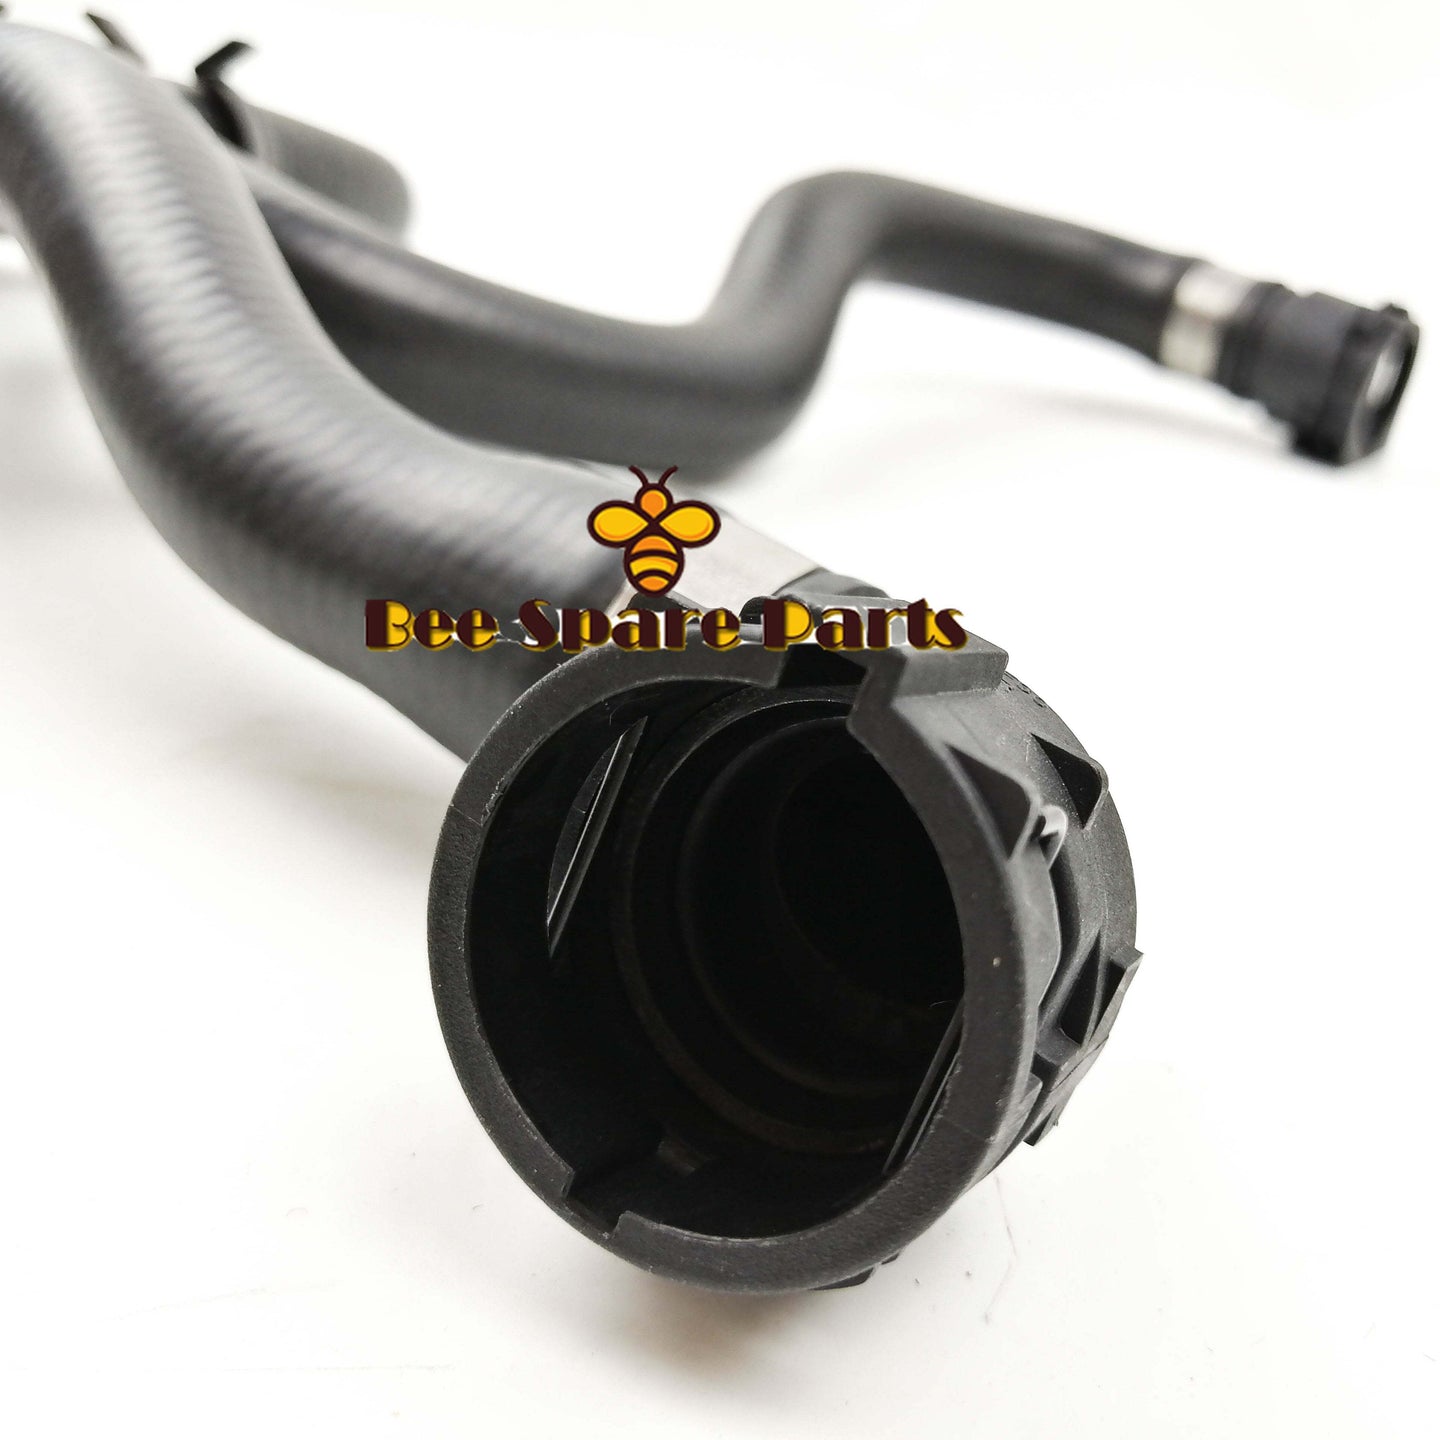 17127609532 Car Accessories Water Tank Cooling Pipe Engine Coolant Hose For BMW 3 Series F35 328LiX 428i 320Li  Part Number:  17127609532  Application:  For BMW 3 Series F35 328LiX 428i 320Li  Condition:  New Aftermarket Parts In Stock